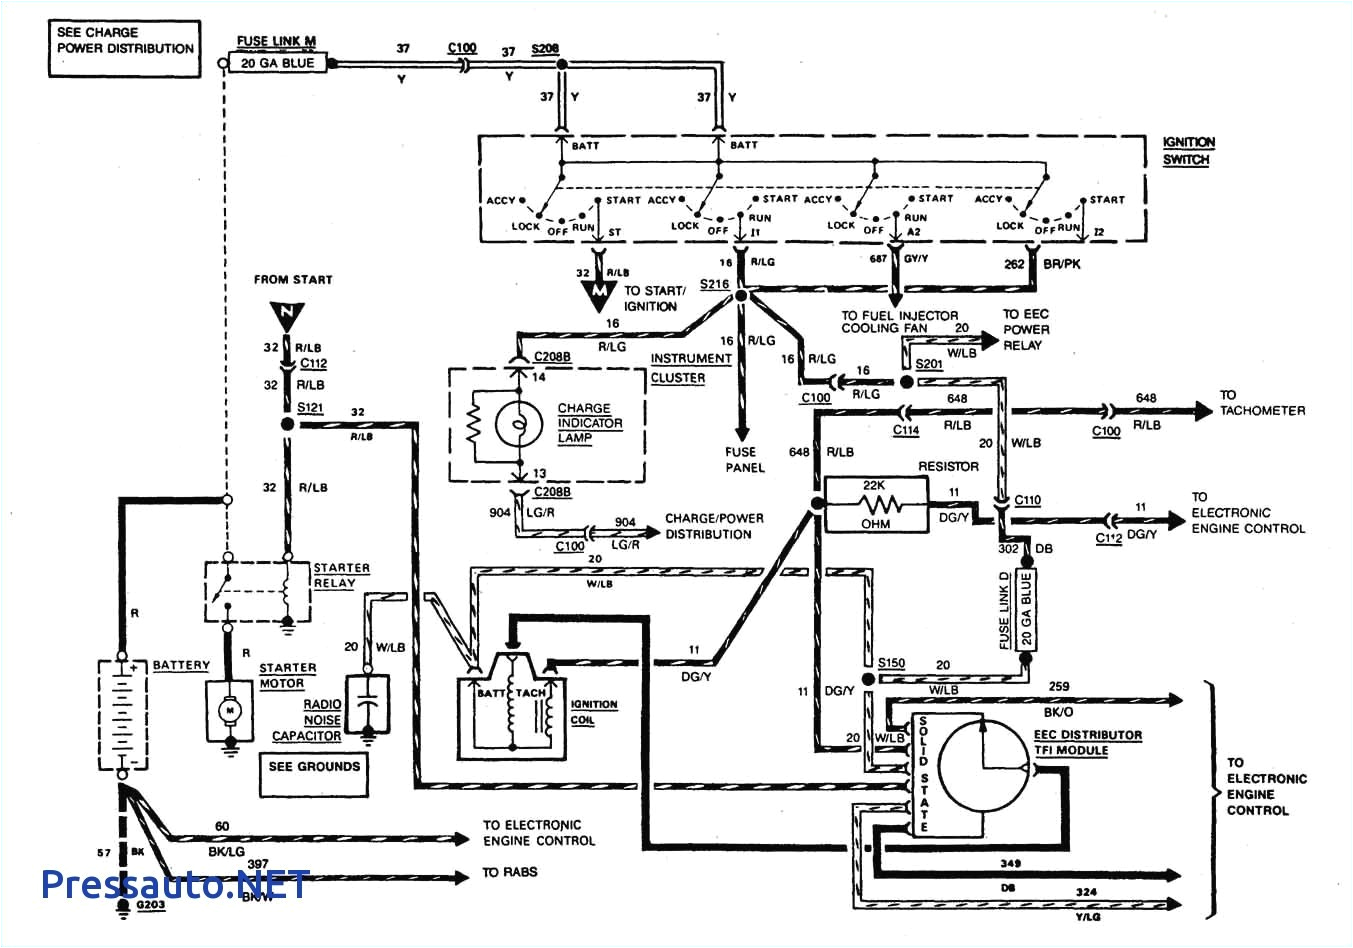 91 f150 wiring diagram wiring diagram for you 1991 f150 ignition system diagram